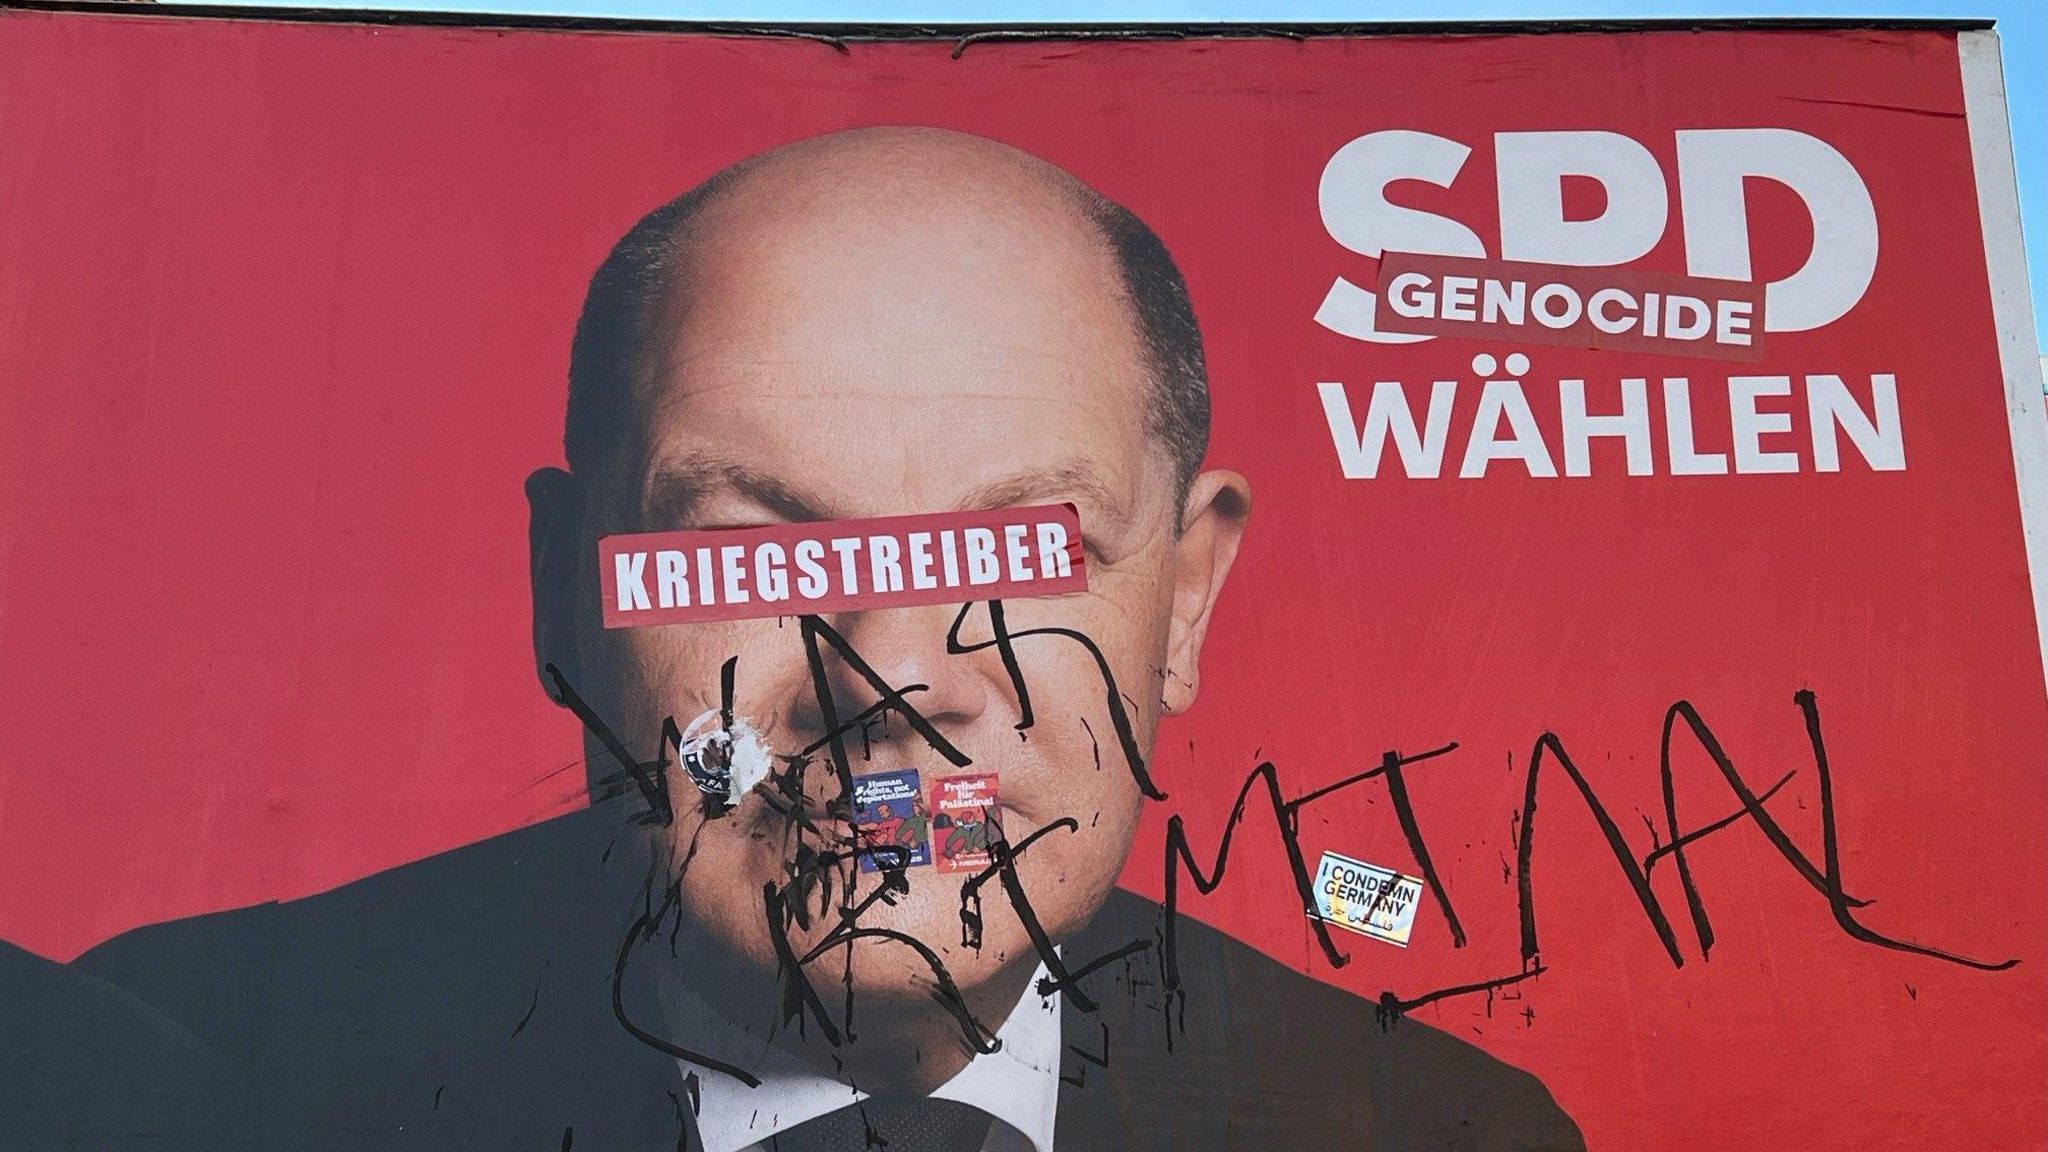 Berlin's graffiti artists label Olaf Scholz a warmonger in German and a war criminal in English